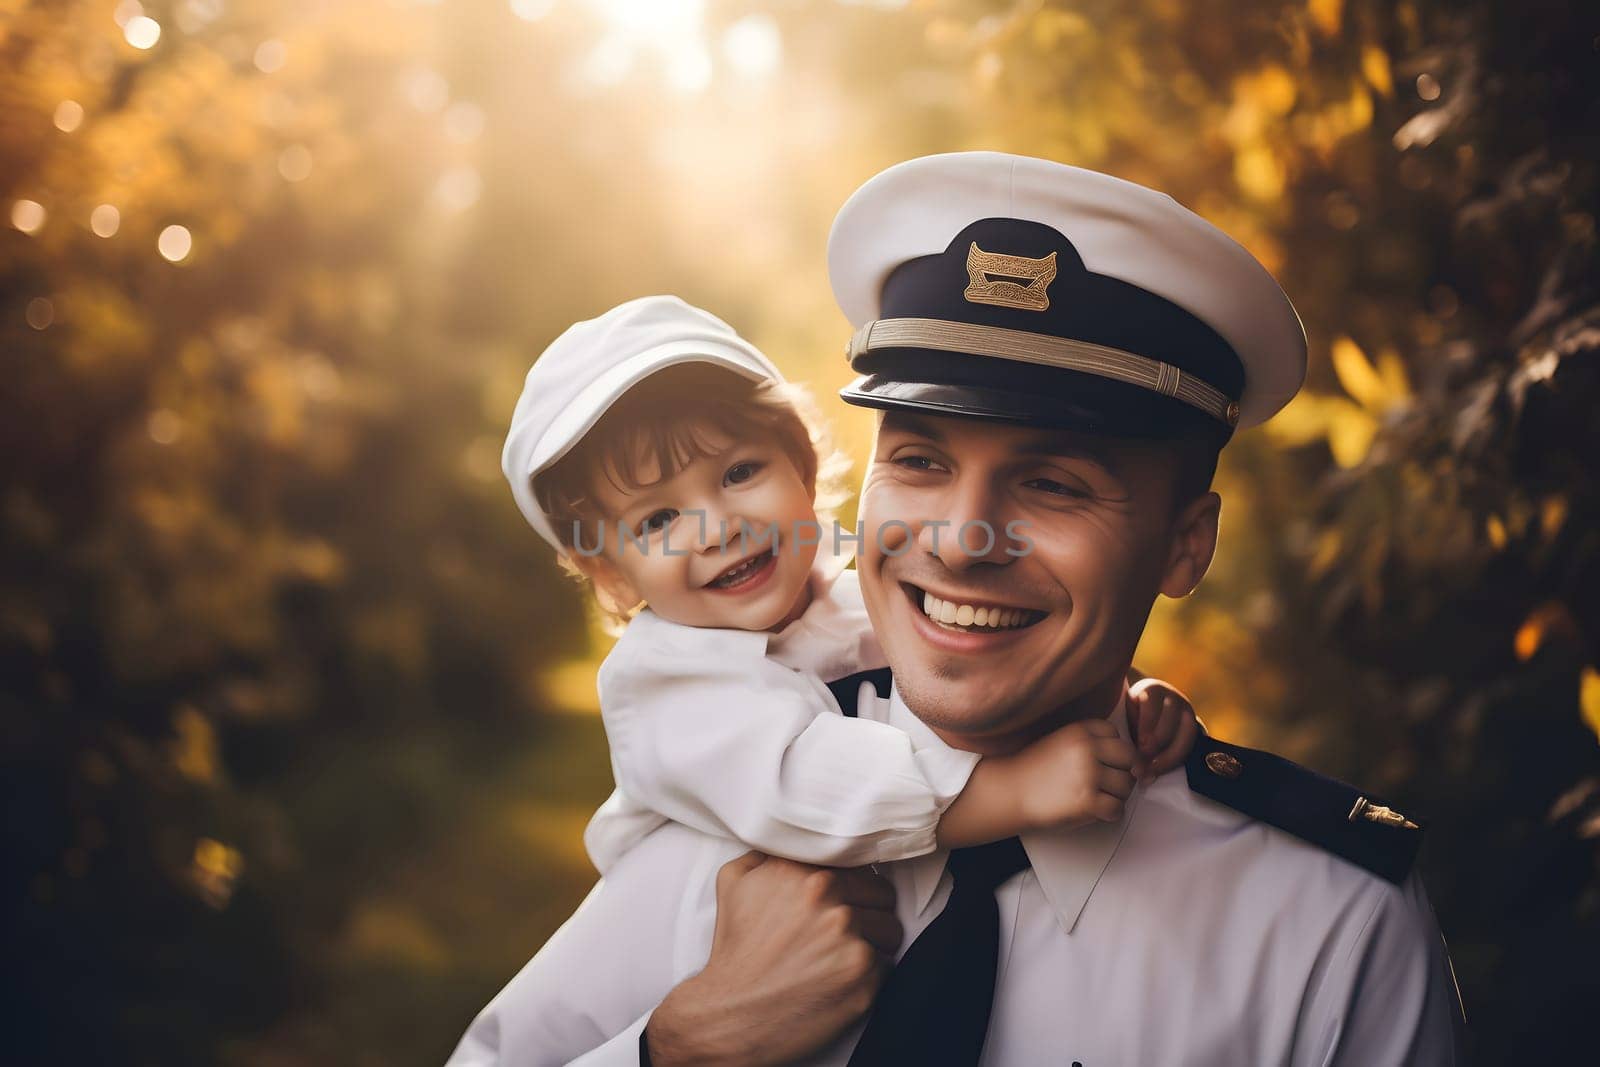 Airplane pilot with his son in park at autumnal day for Fathers Day. Neural network generated in May 2023. Not based on any actual person, scene or pattern.